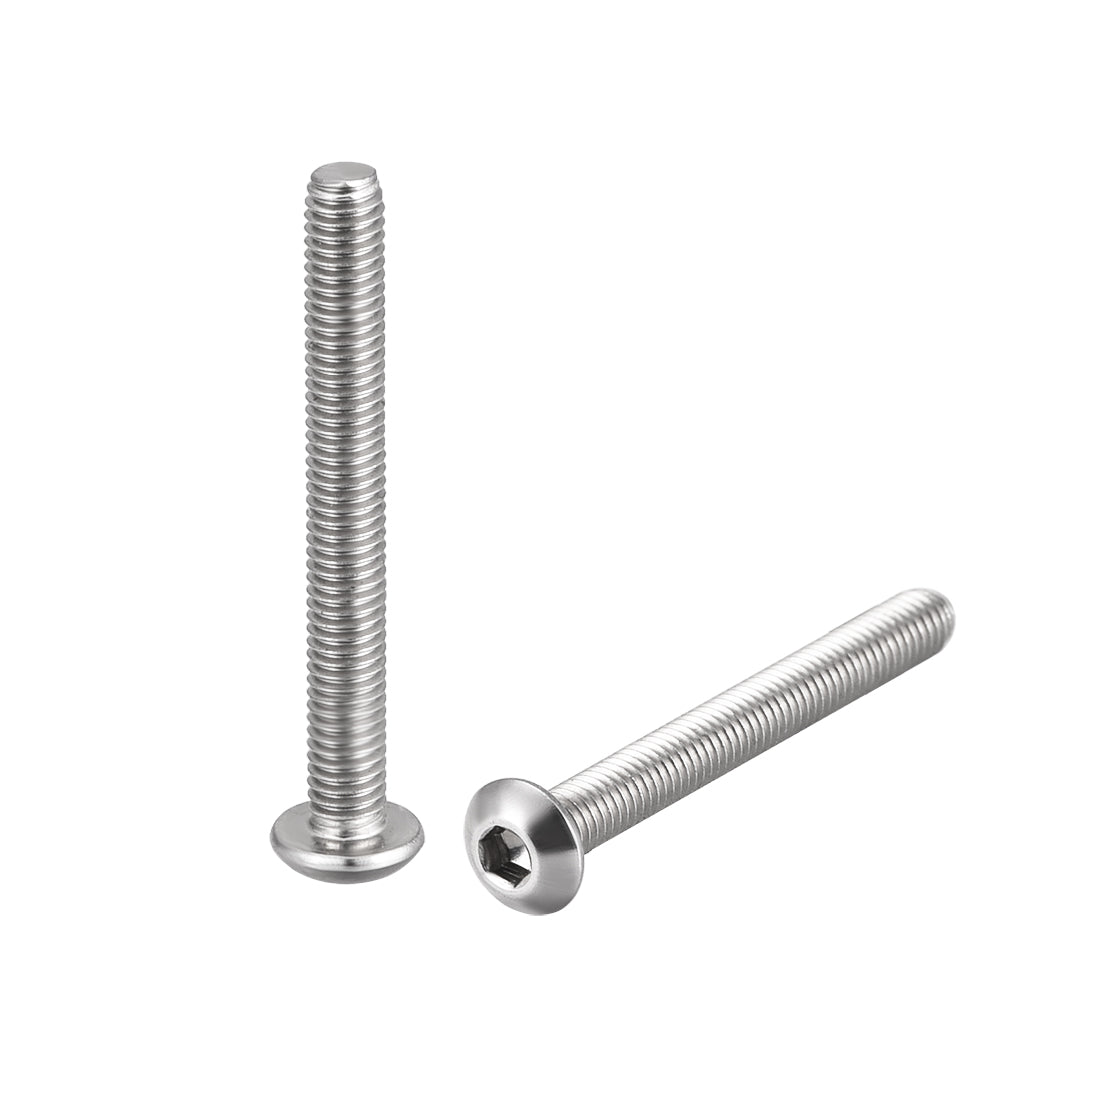 uxcell Uxcell M3x25mm Machine Screws Hex Socket Round Head Screw 304 Stainless Steel Fasteners Bolts 50pcs